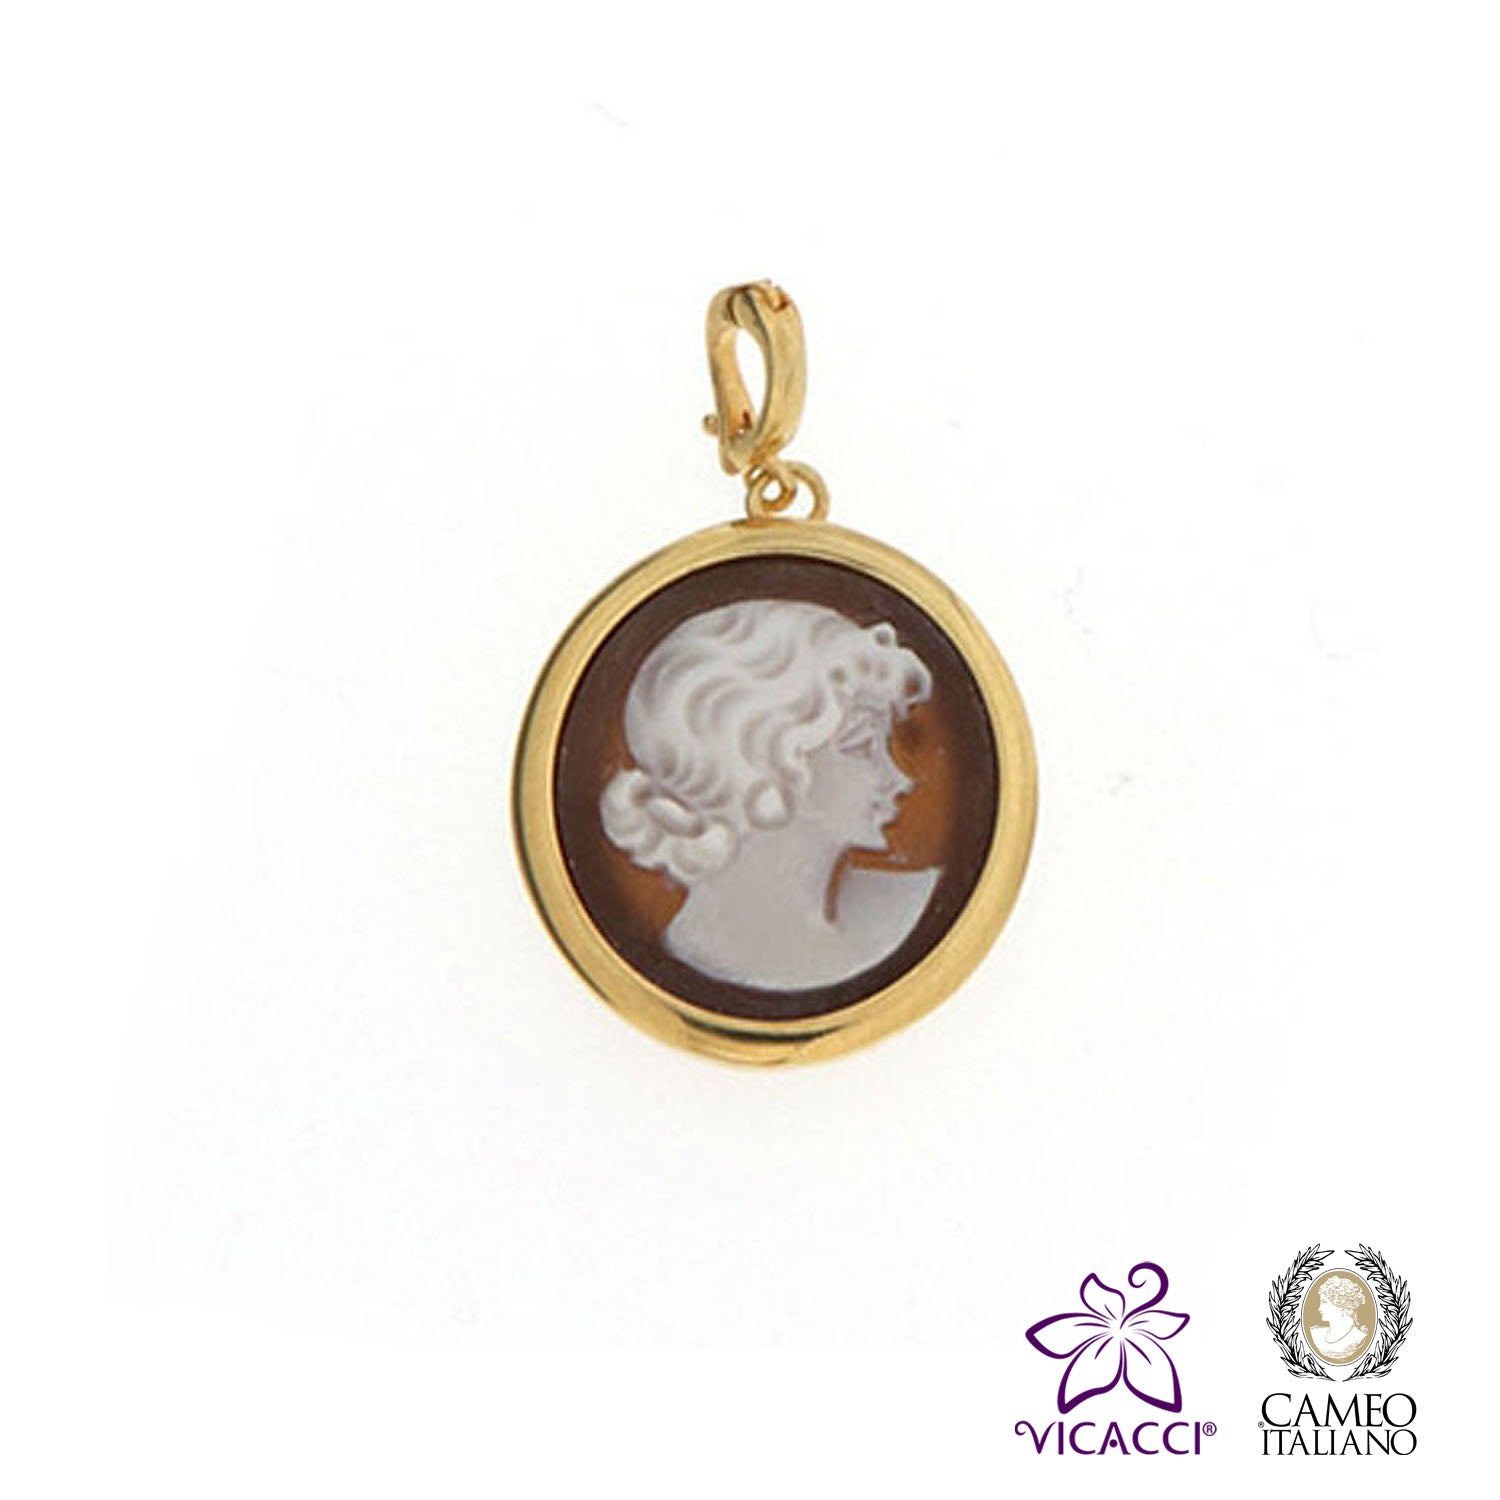 Cameo Italiano, S201 Brooch Pendant, 925 Sterling Silver Gold Plated